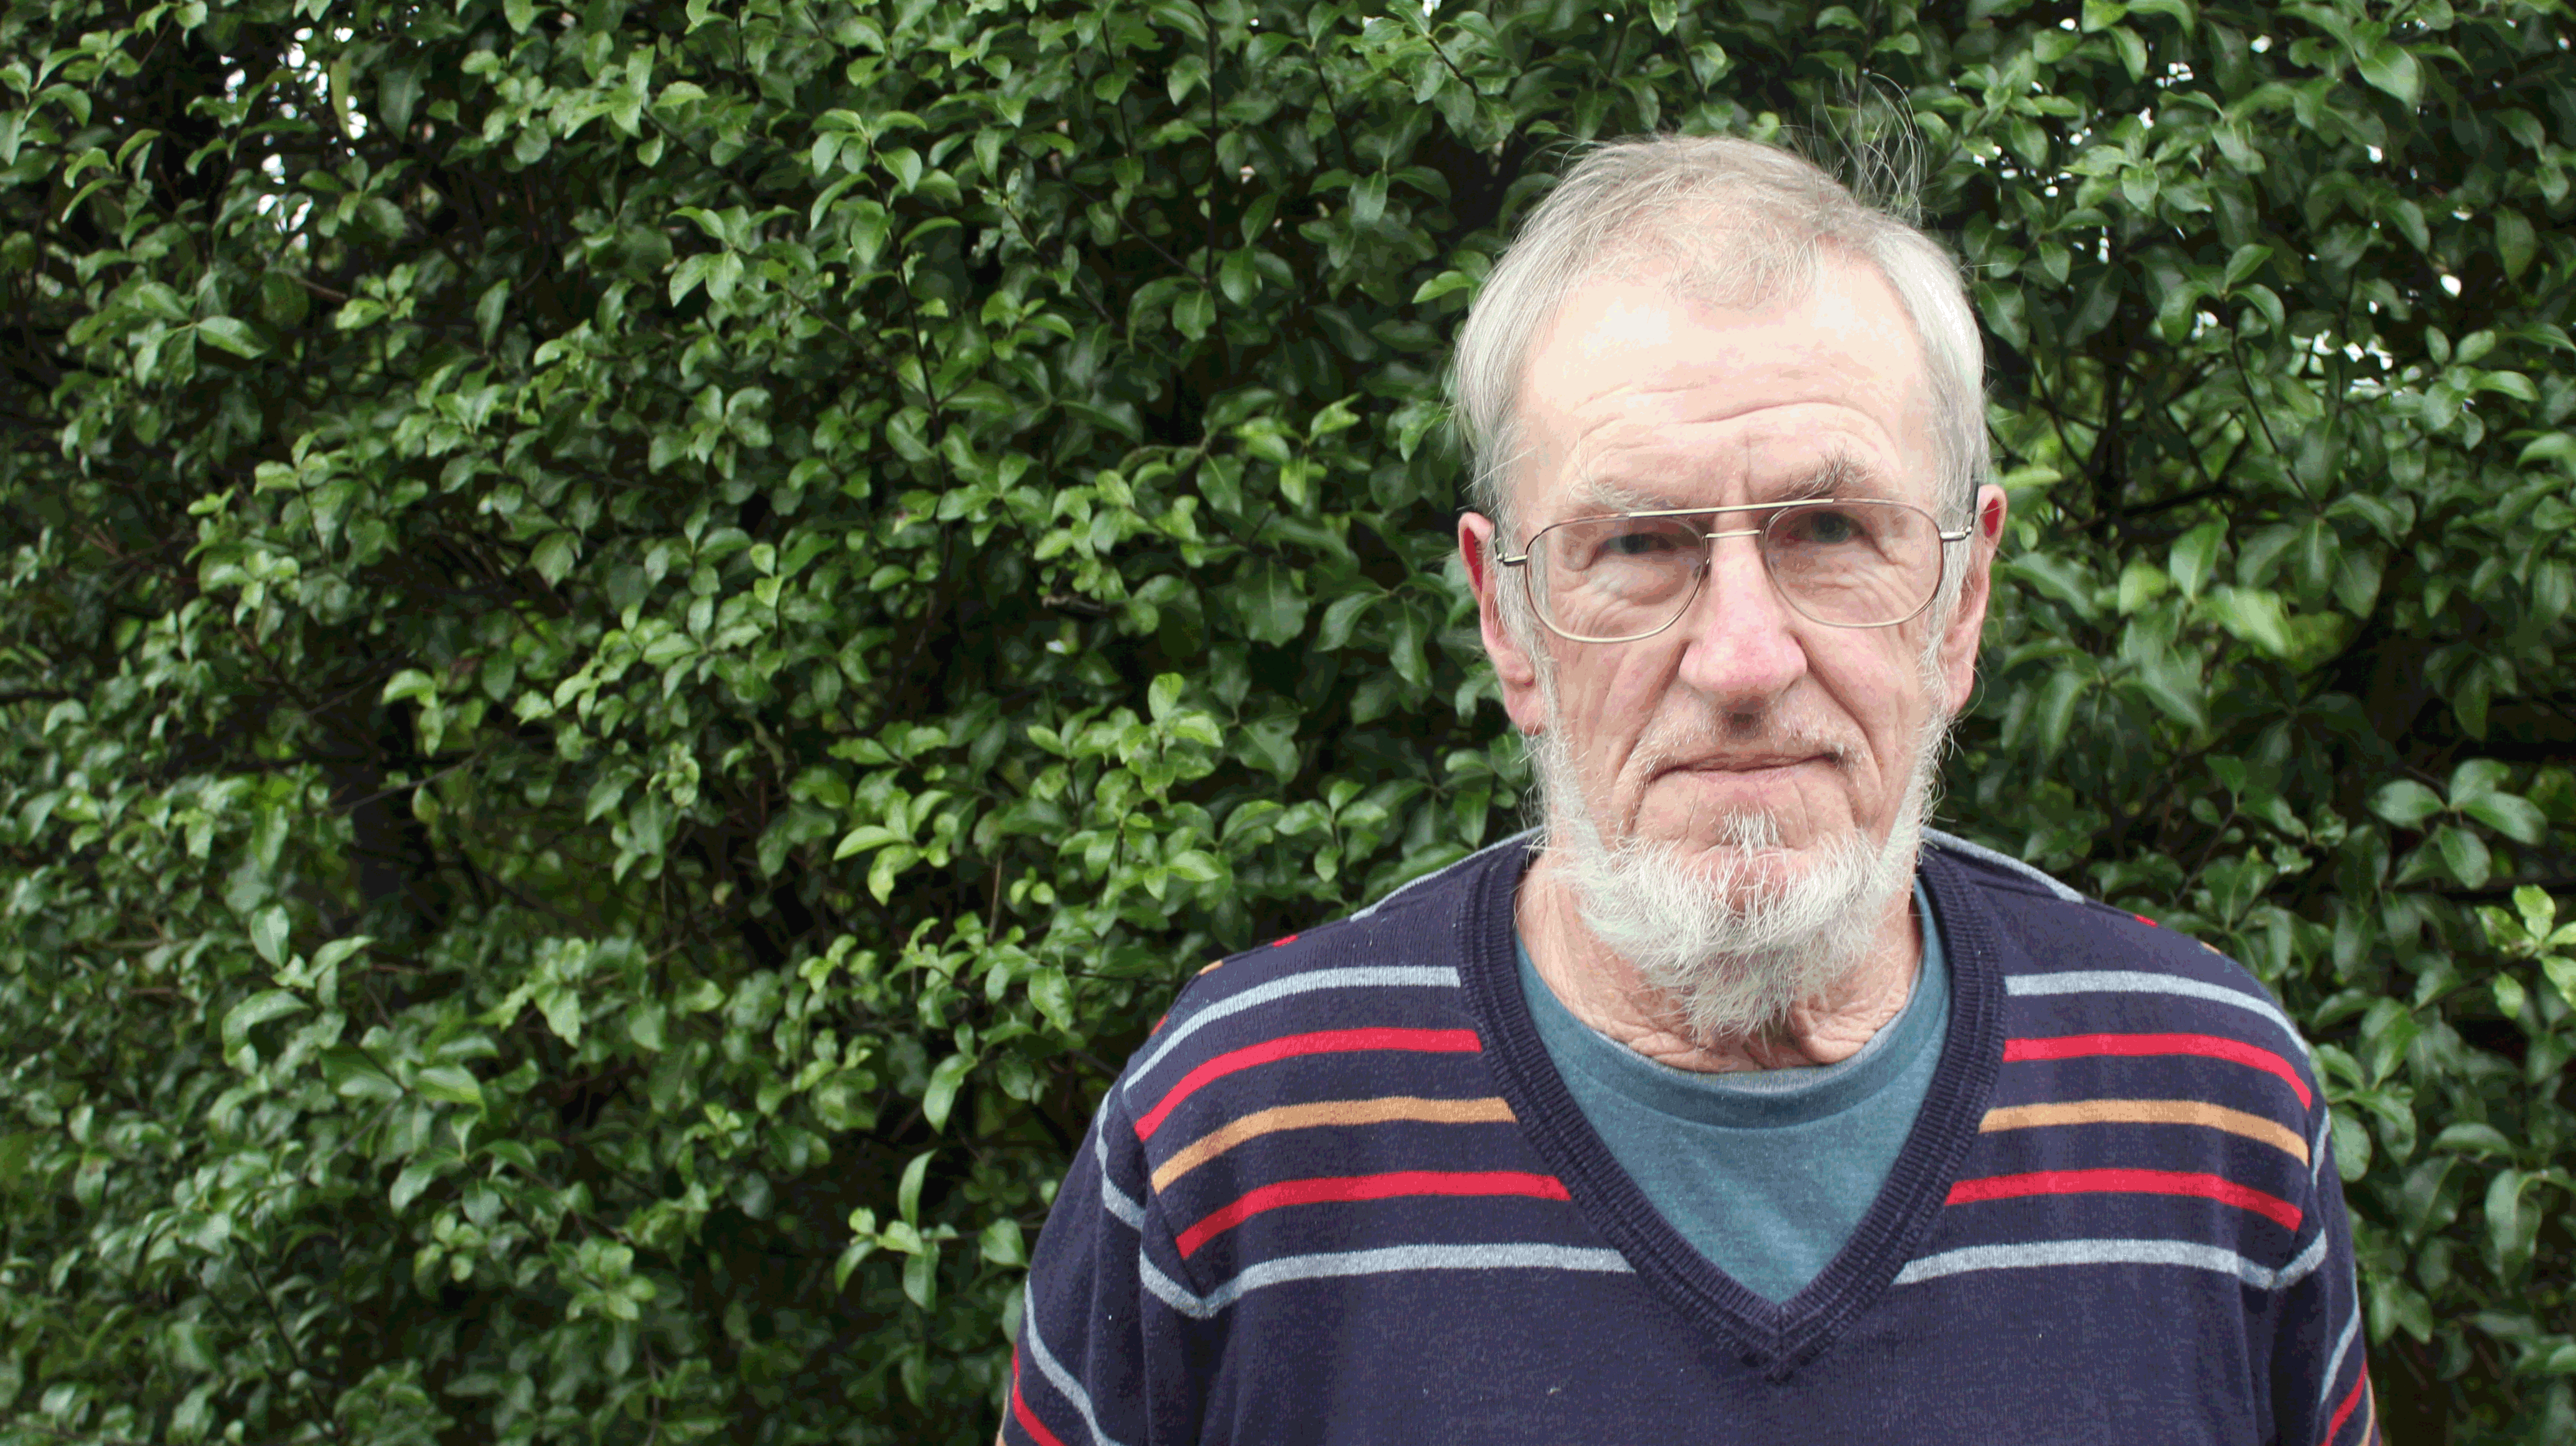 A man with glasses, beard, and grey hair stands in front of some foliage looking directly at camera